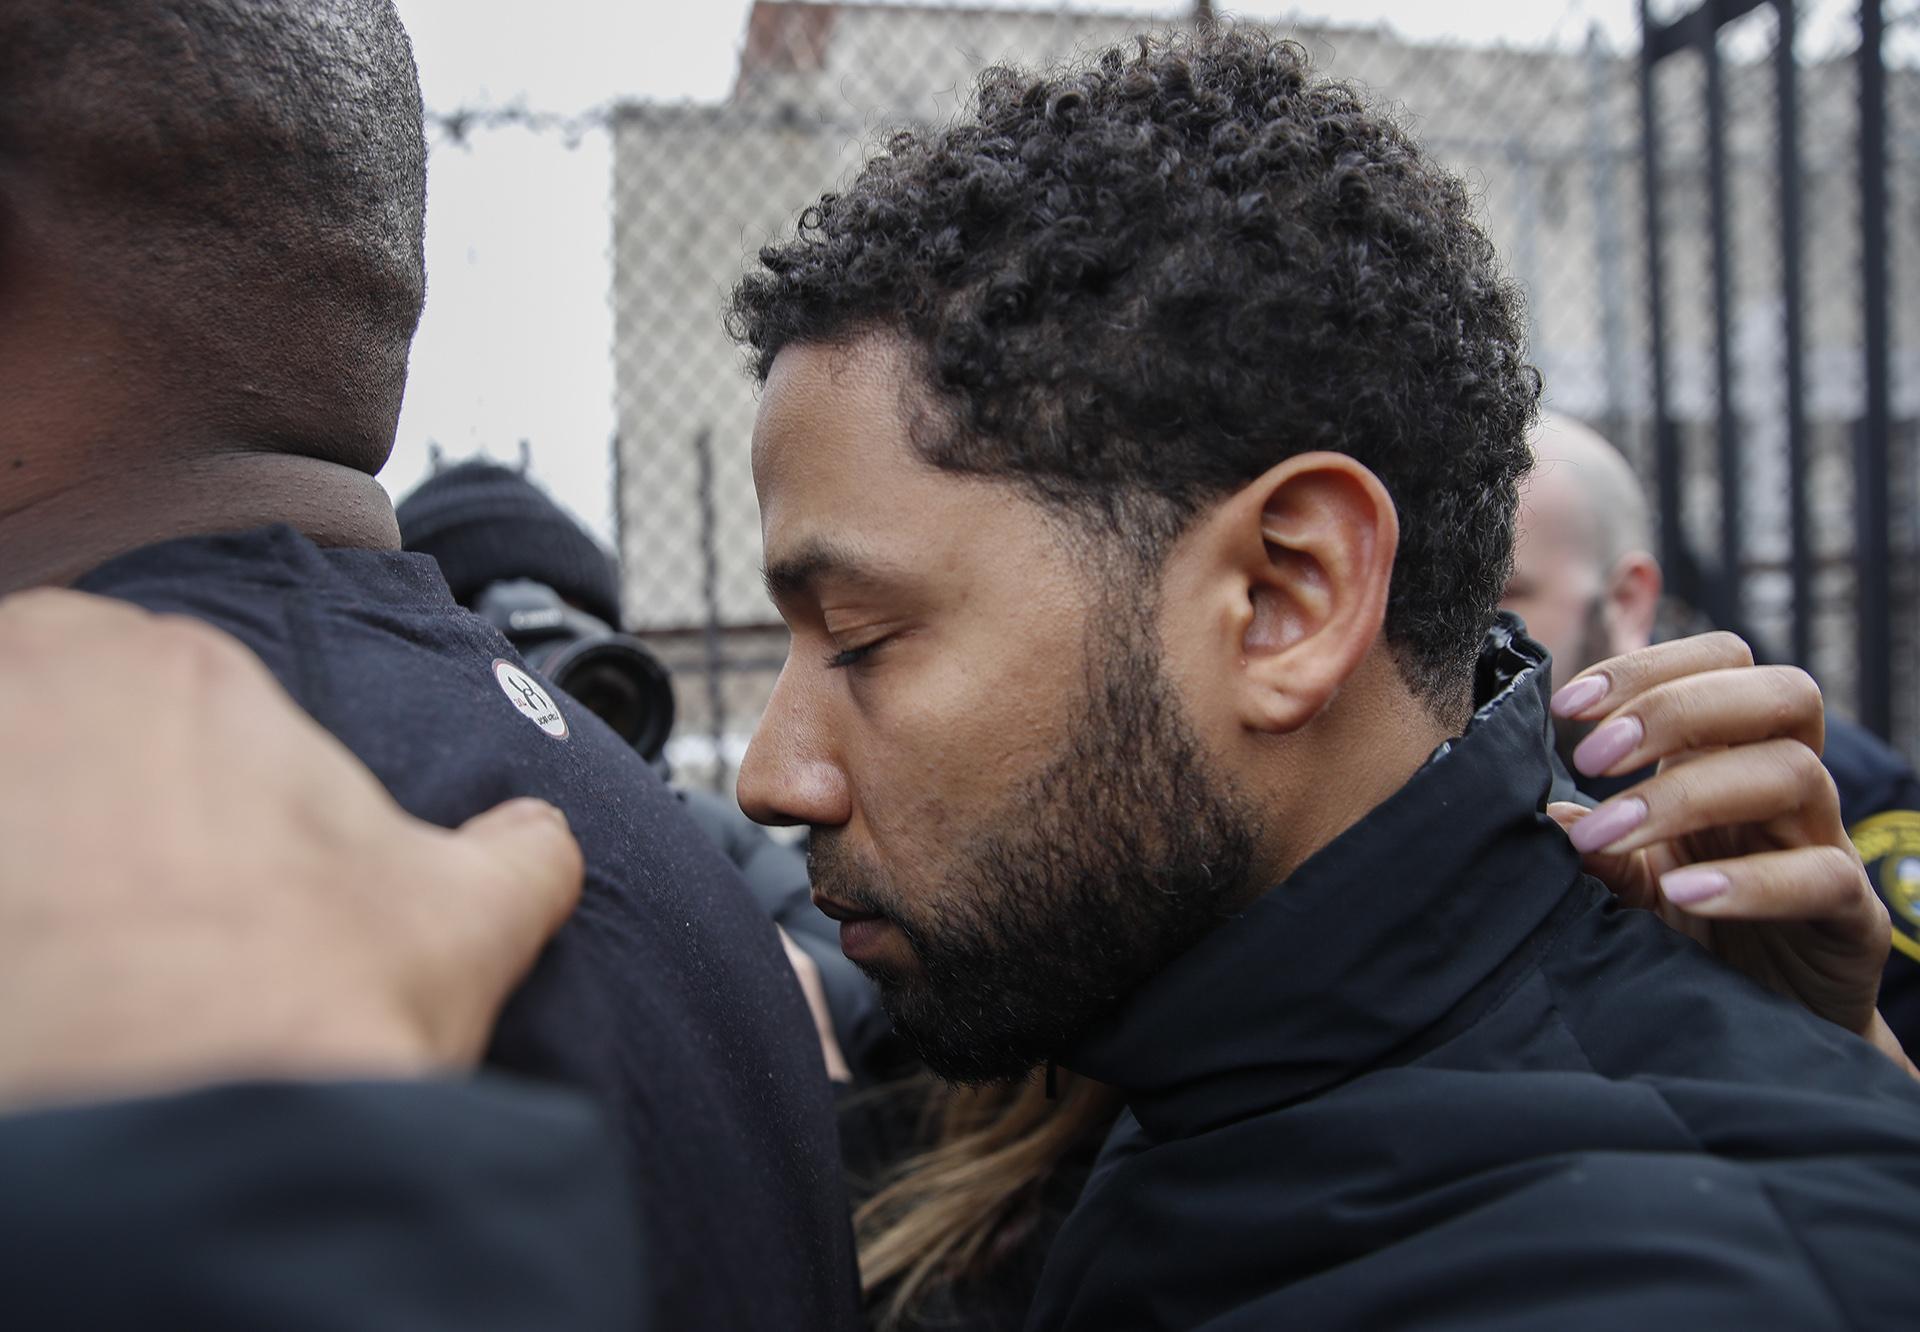 “Empire” actor Jussie Smollett leaves Cook County jail following his release, Thursday, Feb. 21, 2019. (AP Photo / Kamil Krzaczynski)